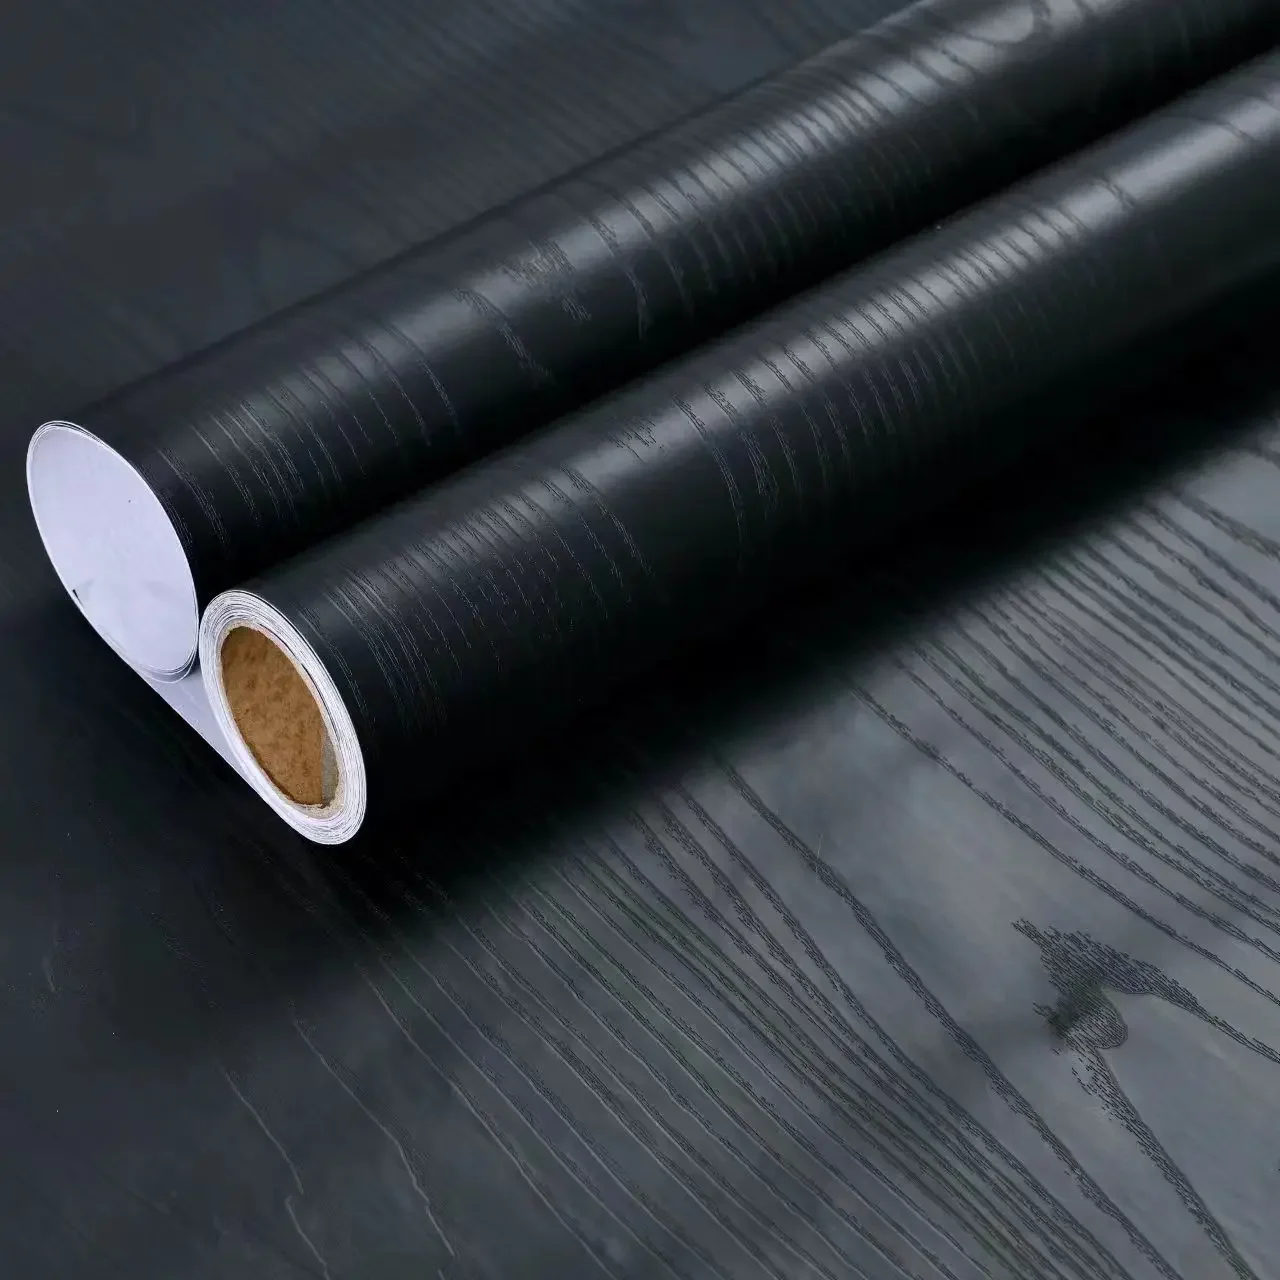 Vinyl Black Wood Grain Decor Contact Paper for Furniture Renovation Self Adhesive Waterproof Wallpaper Stickers for Home Decor black gold metal arc self adhesive wallpaper peel and stick contact paper bedroom wall renovation furniture renovation stickers